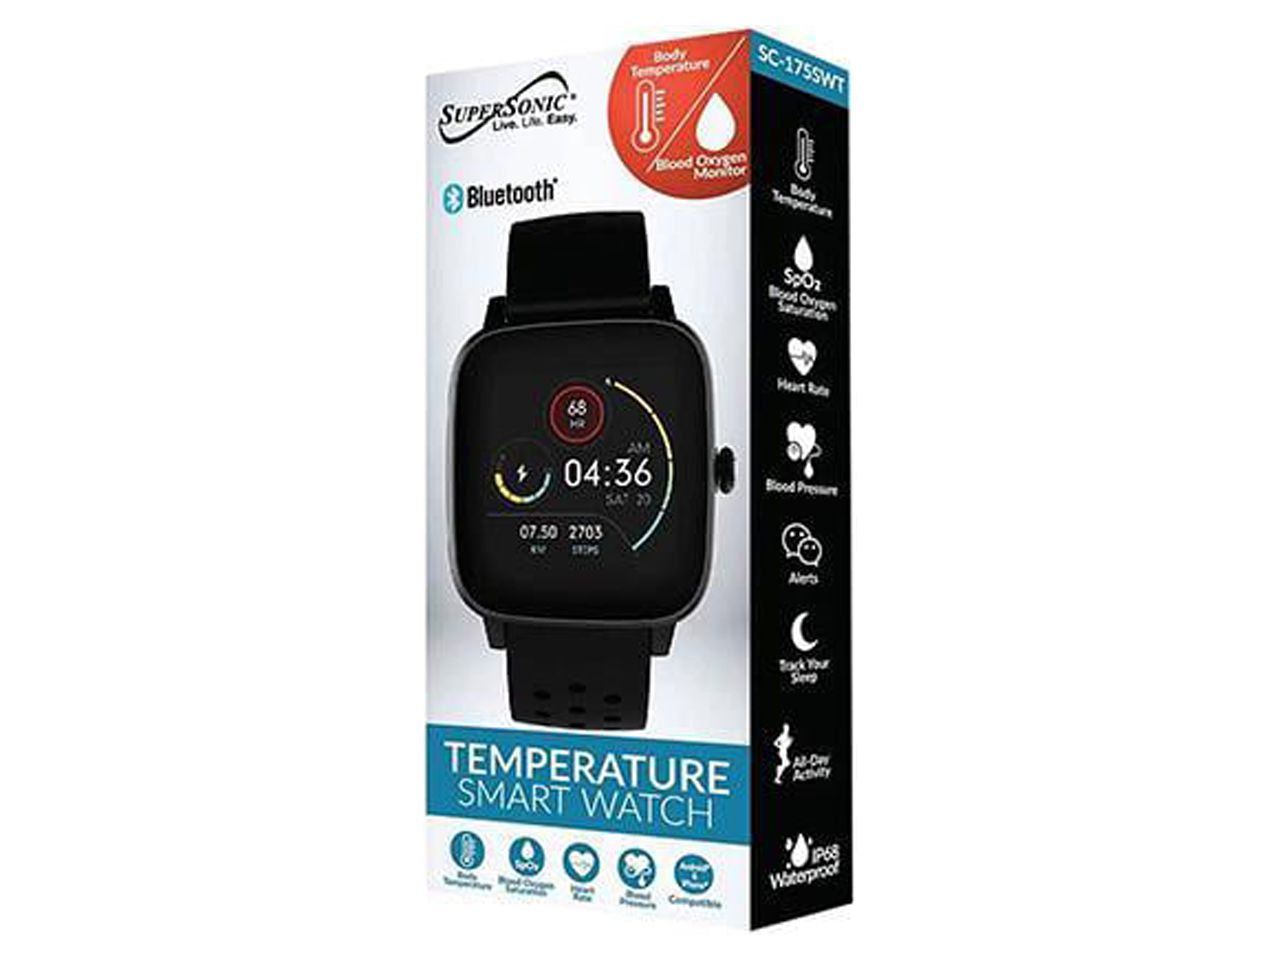 Supersonic 1.4” Touch Screen Smartwatch with Body Temperature Monitor Unisex New - Black - image 3 of 4